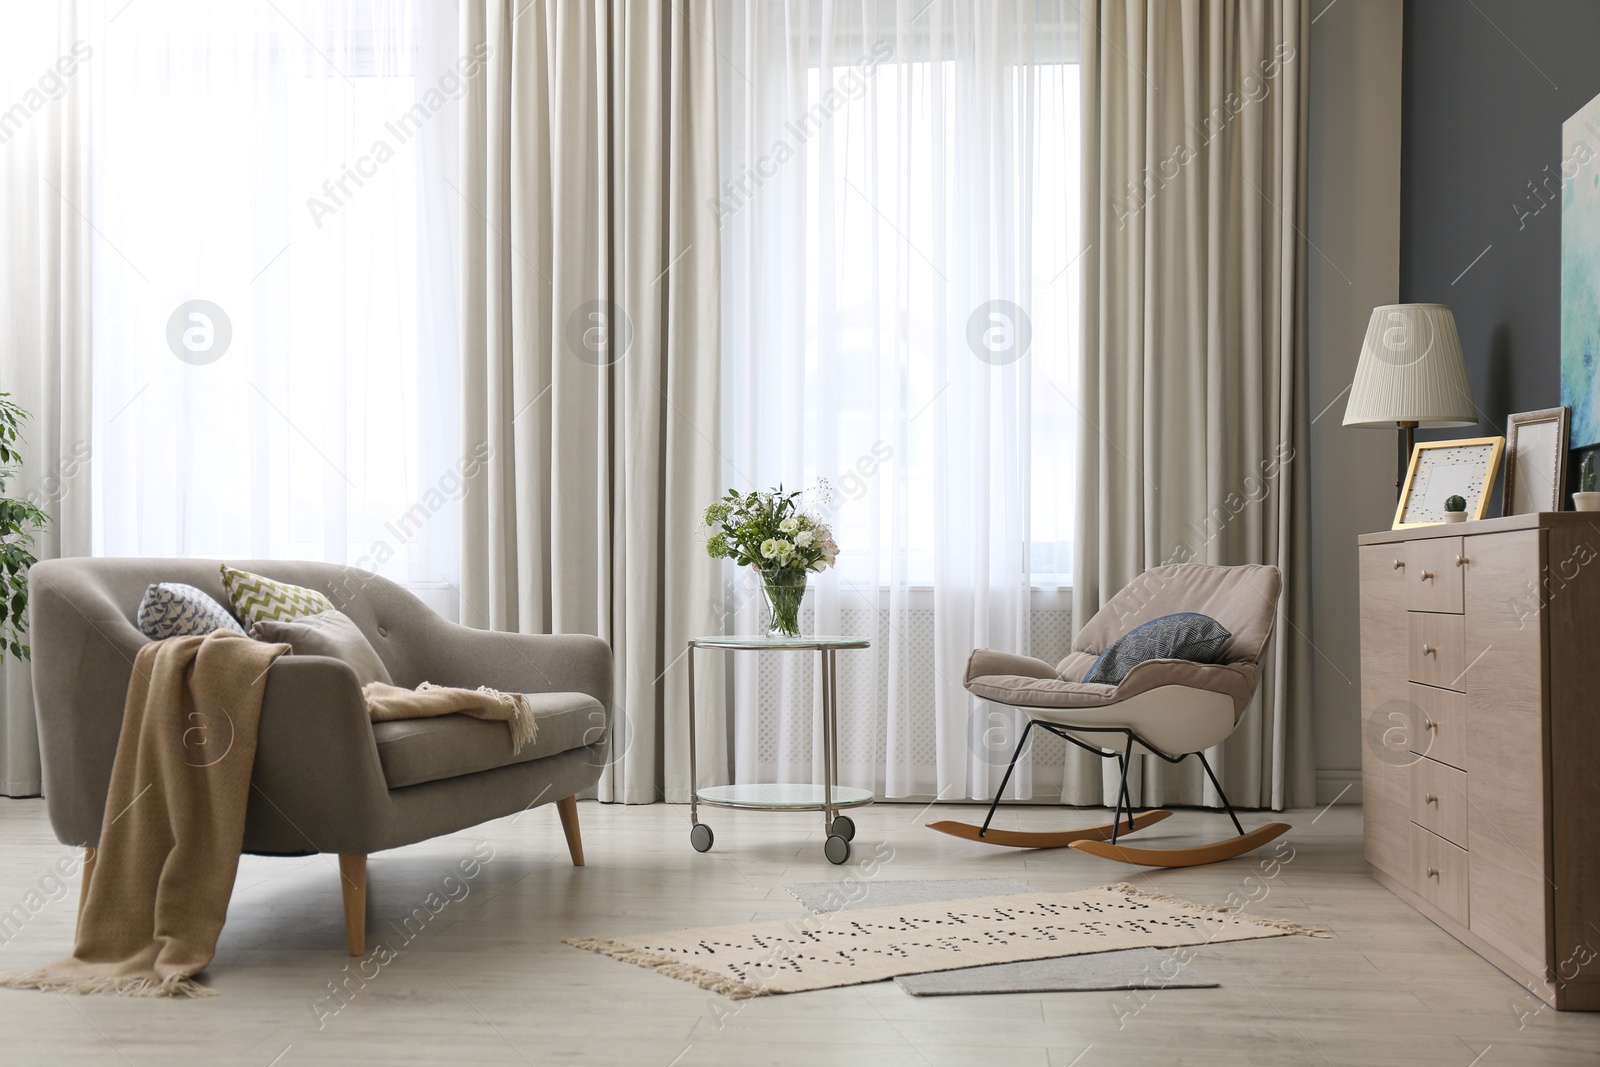 Photo of Modern living room interior with beautiful curtains on window